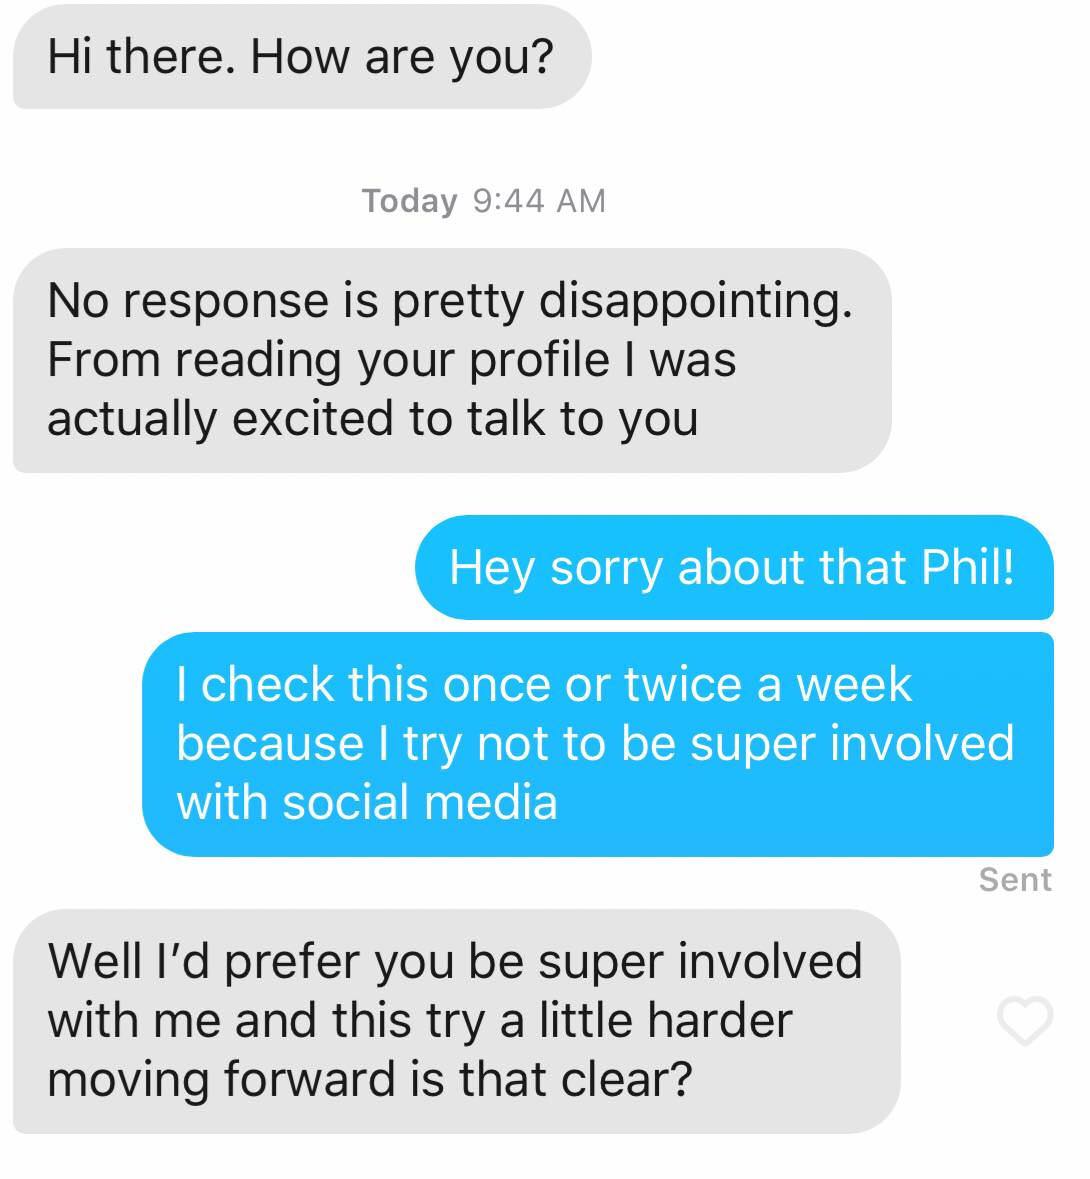 organization - Hi there. How are you? Today No response is pretty disappointing. From reading your profile I was actually excited to talk to you Hey sorry about that Phil! I check this once or twice a week because I try not to be super involved with socia